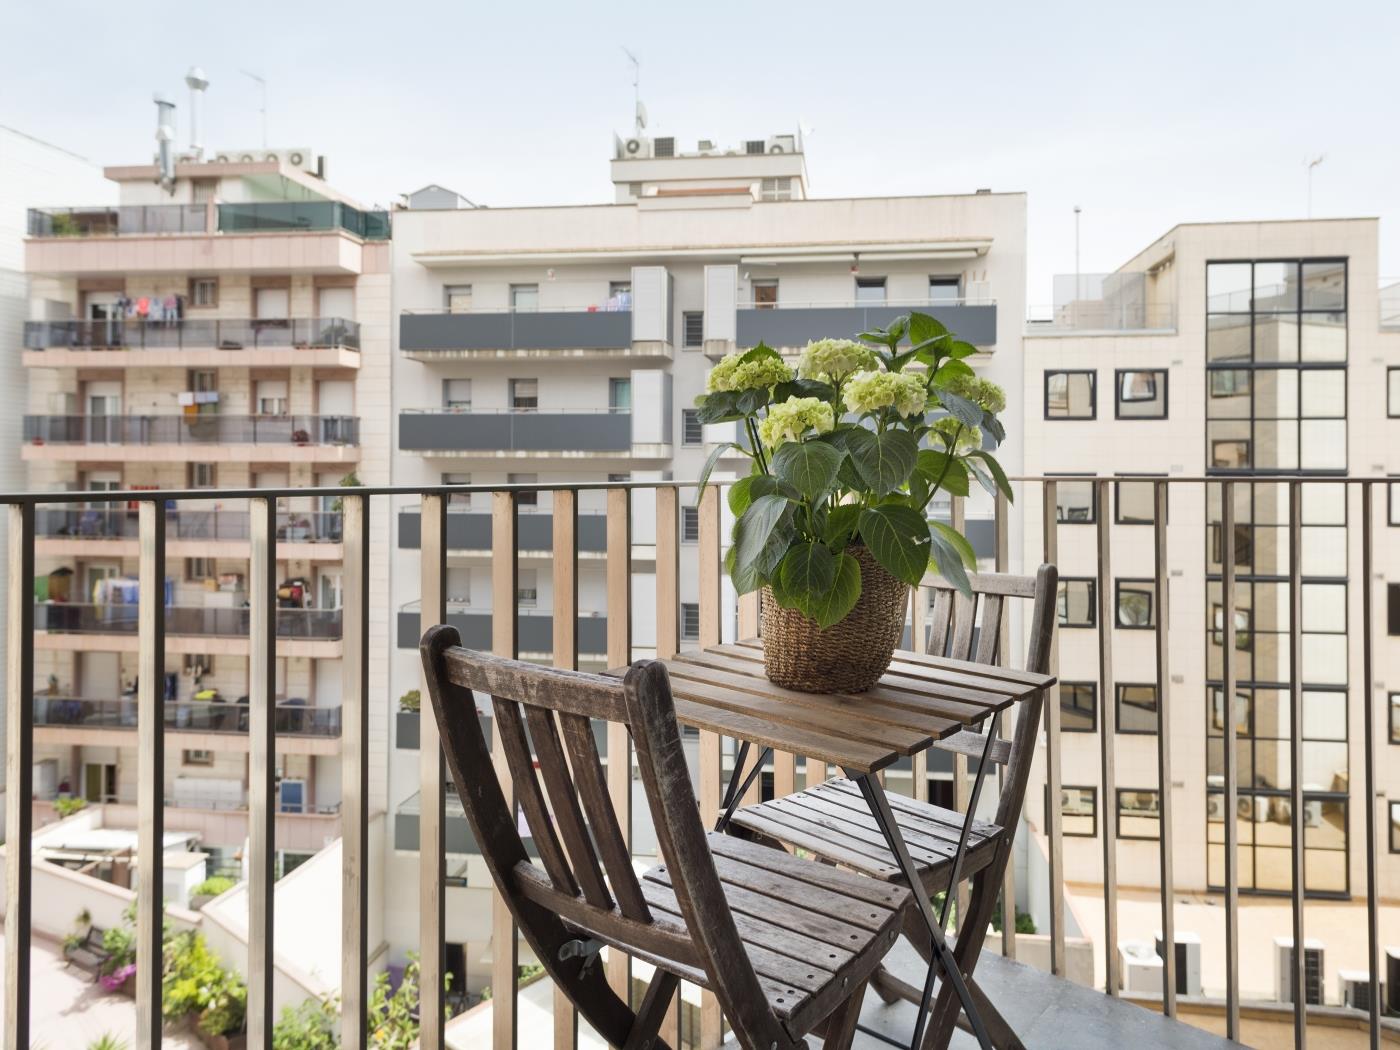 Apartment Barcelona in the Center with Pool - My Space Barcelona Aпартаменты